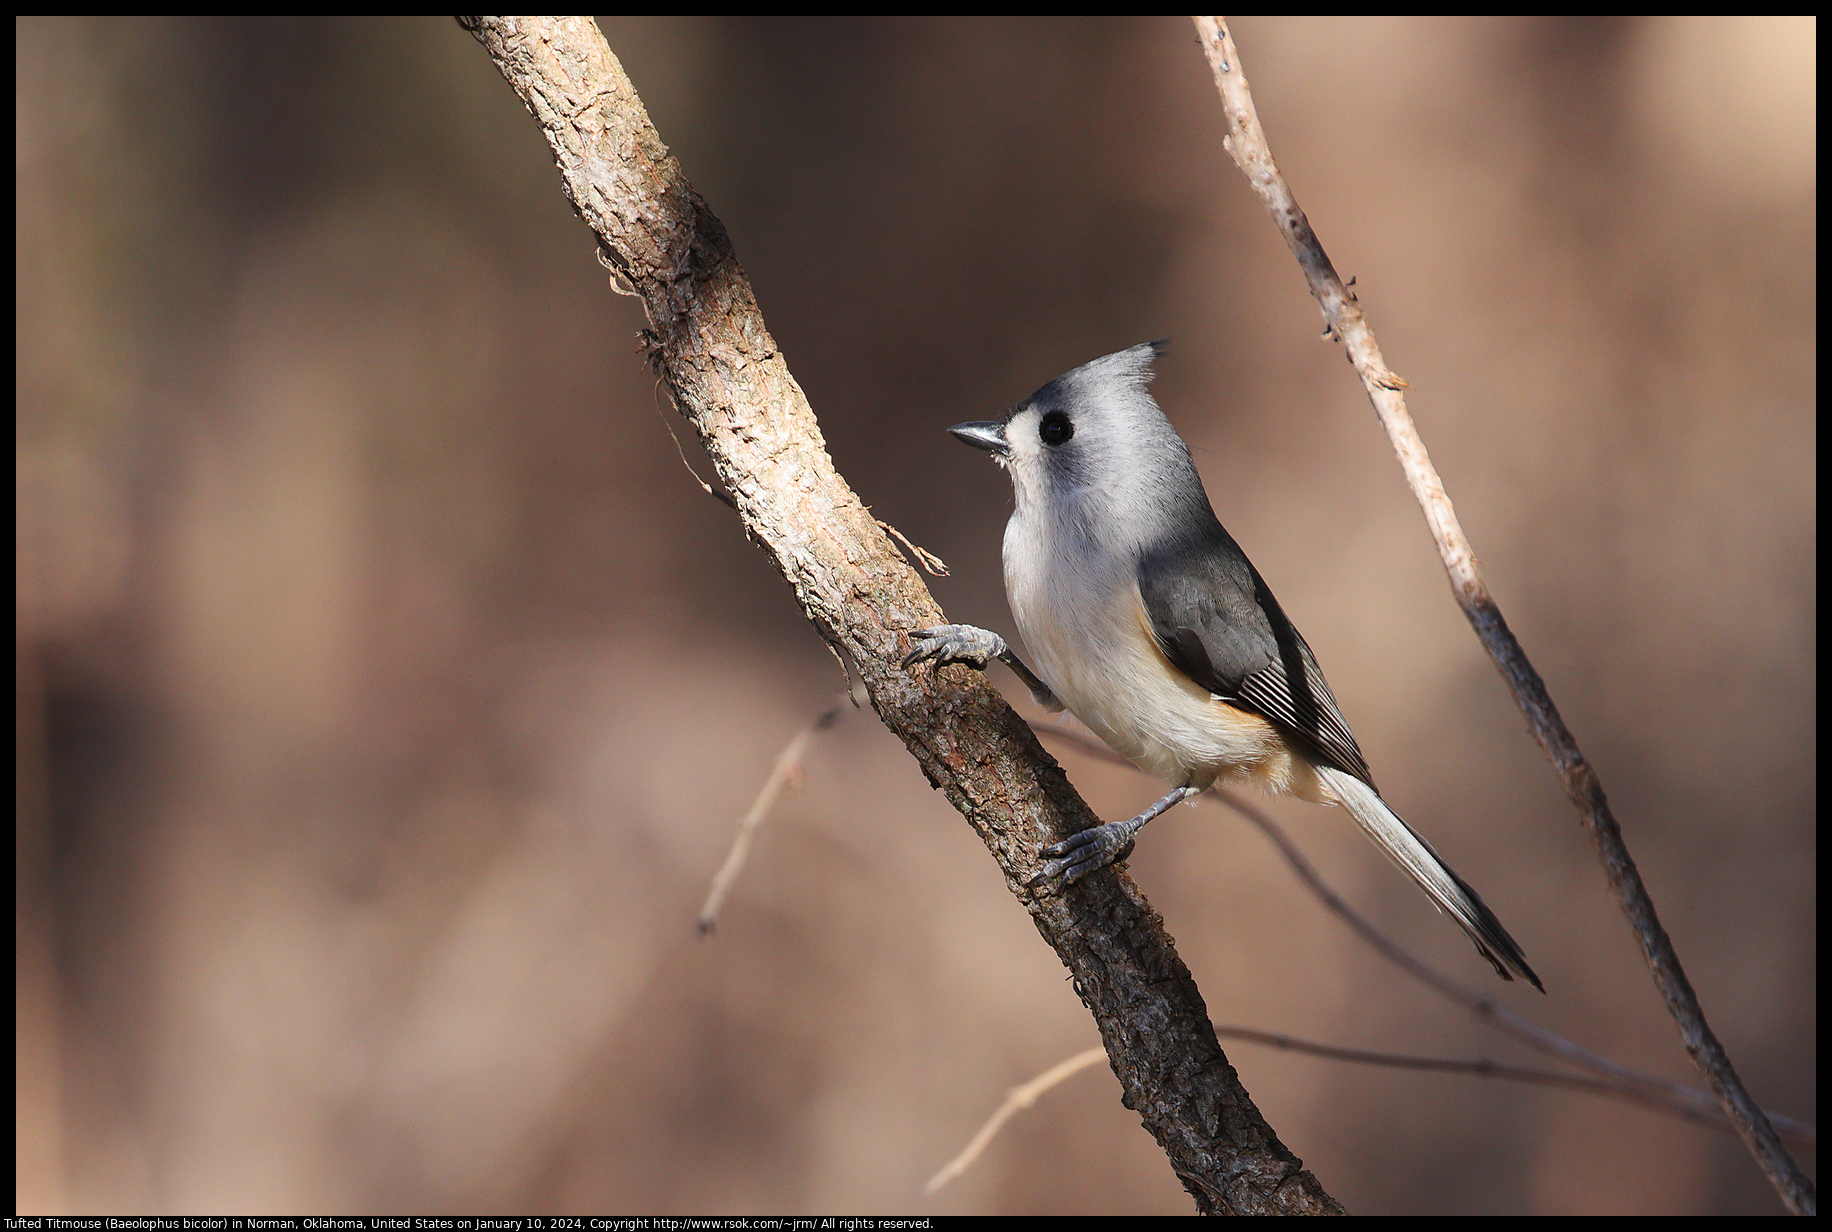 Tufted Titmouse (Baeolophus bicolor) in Norman, Oklahoma, United States on January 10, 2024